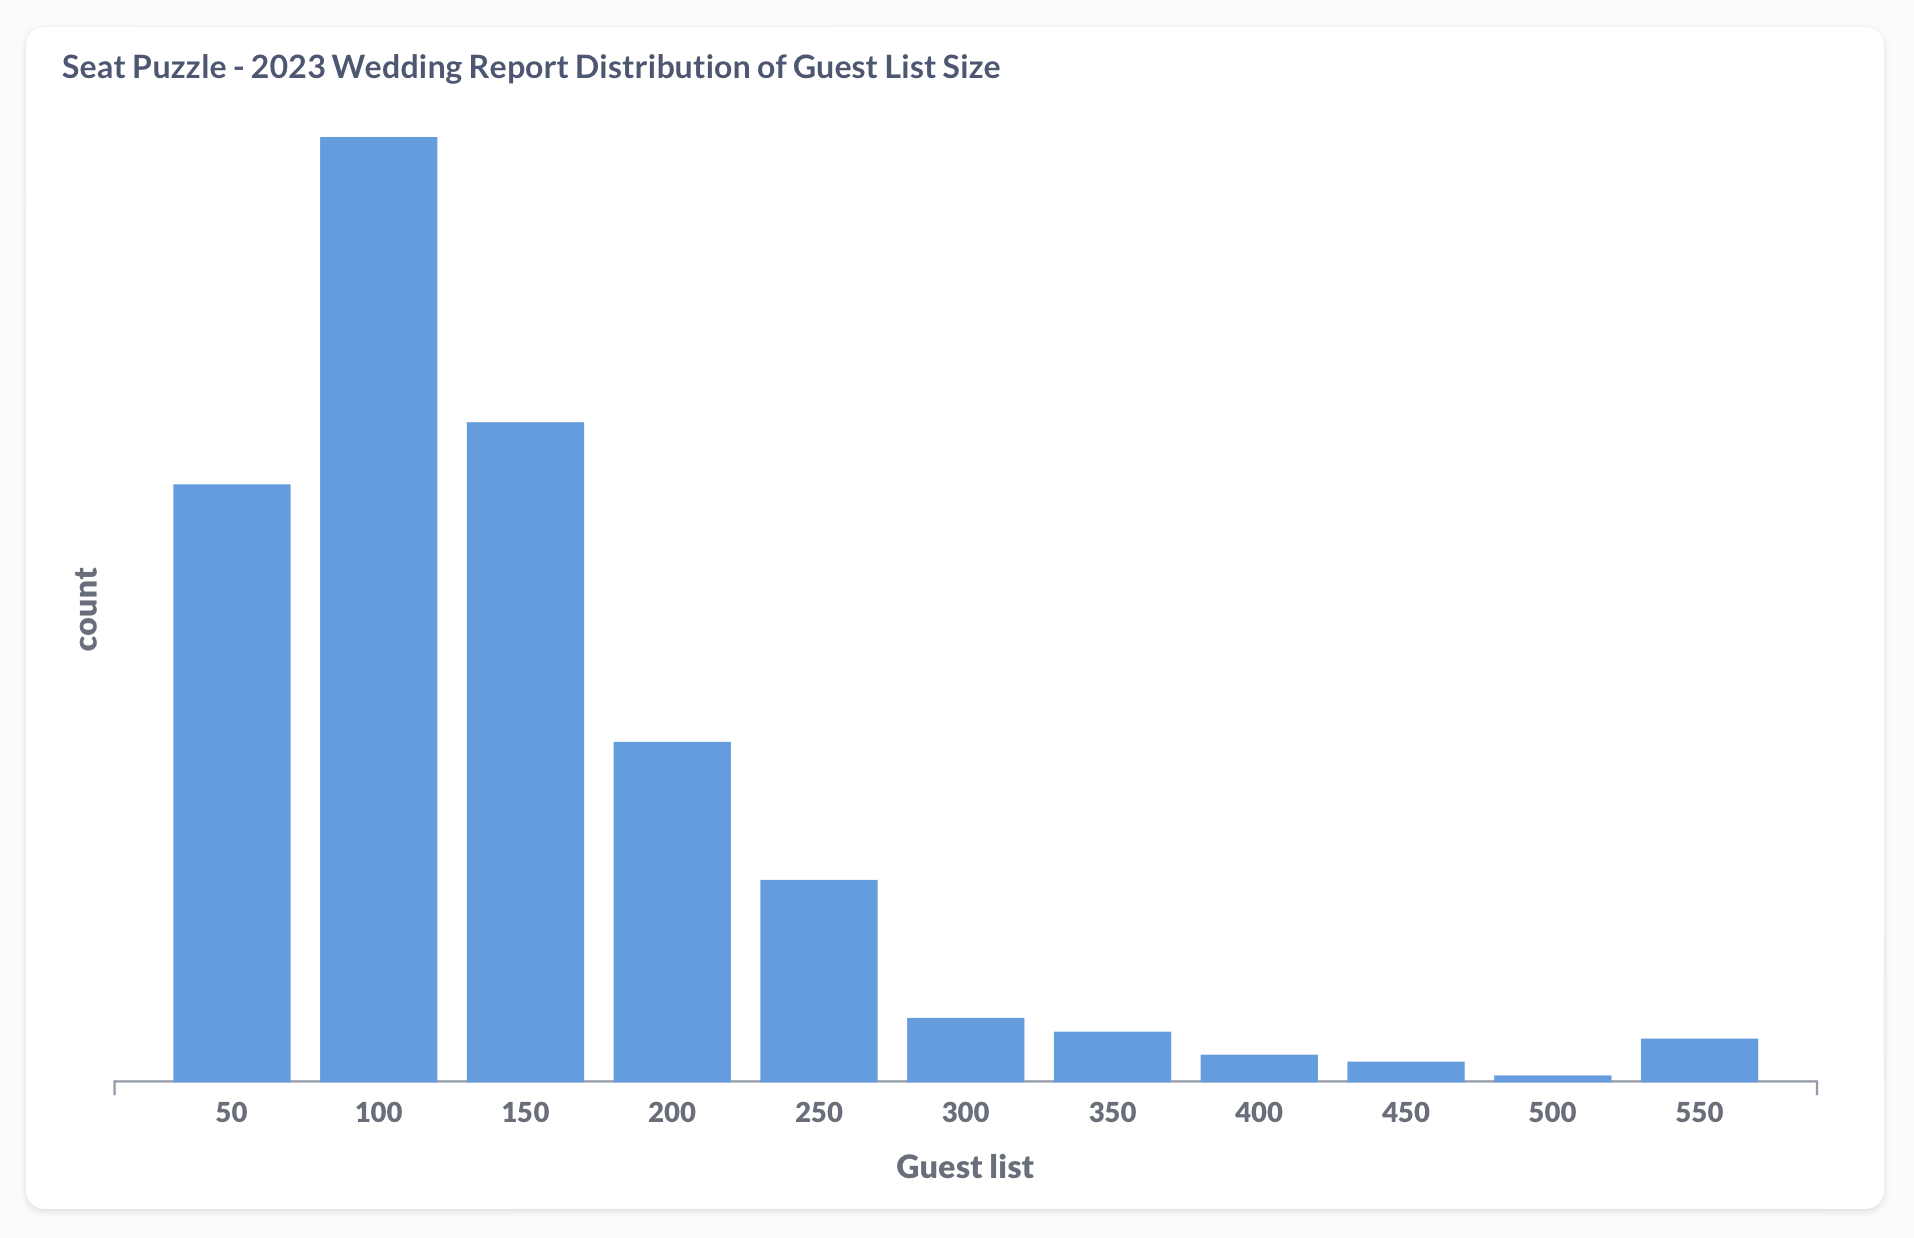 Distribution of guest lists during the 2023 wedding season